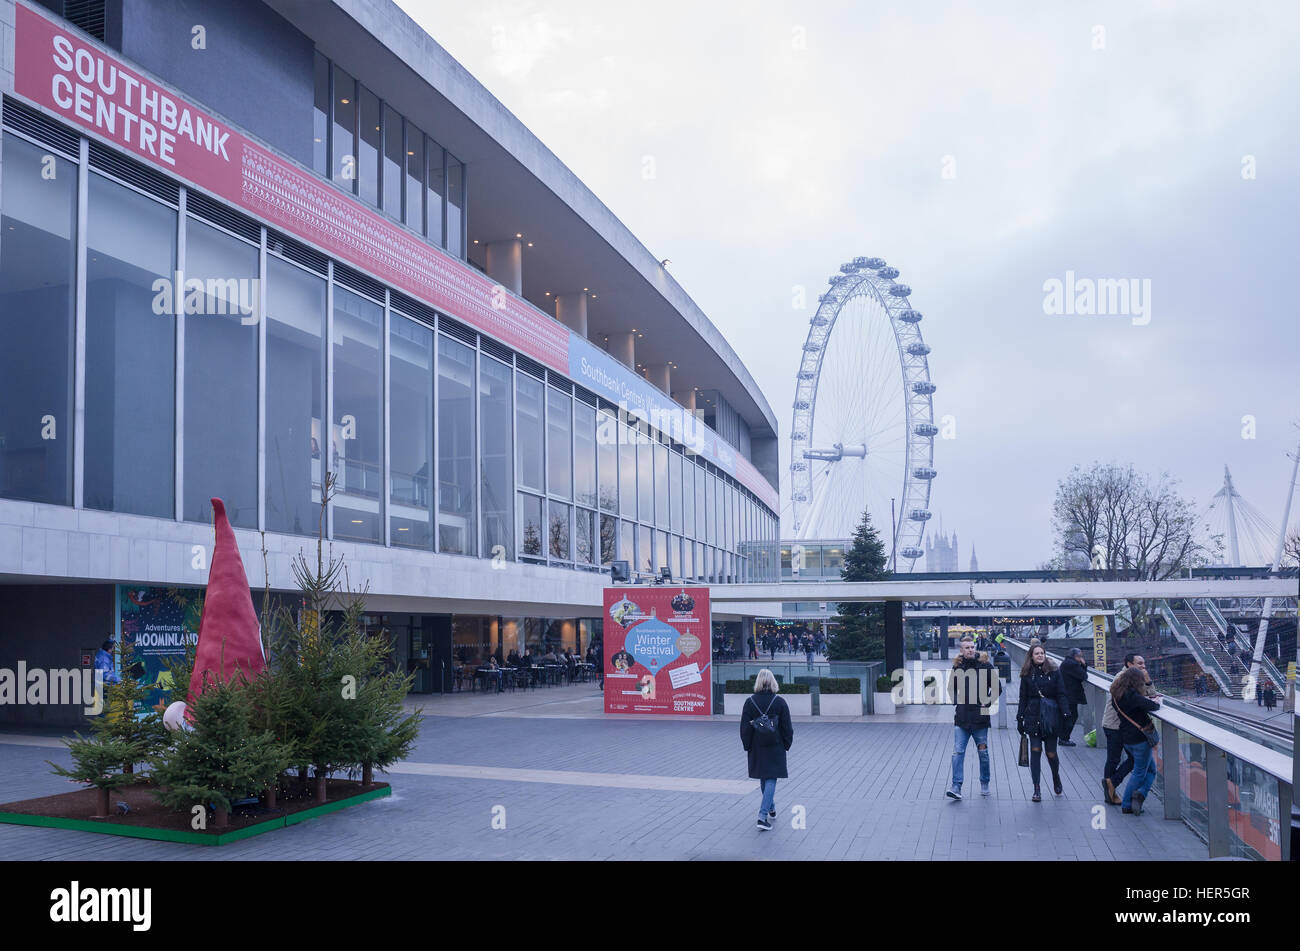 South bank Centre in front of the London Eye (Millennium ferris wheel). Stock Photo